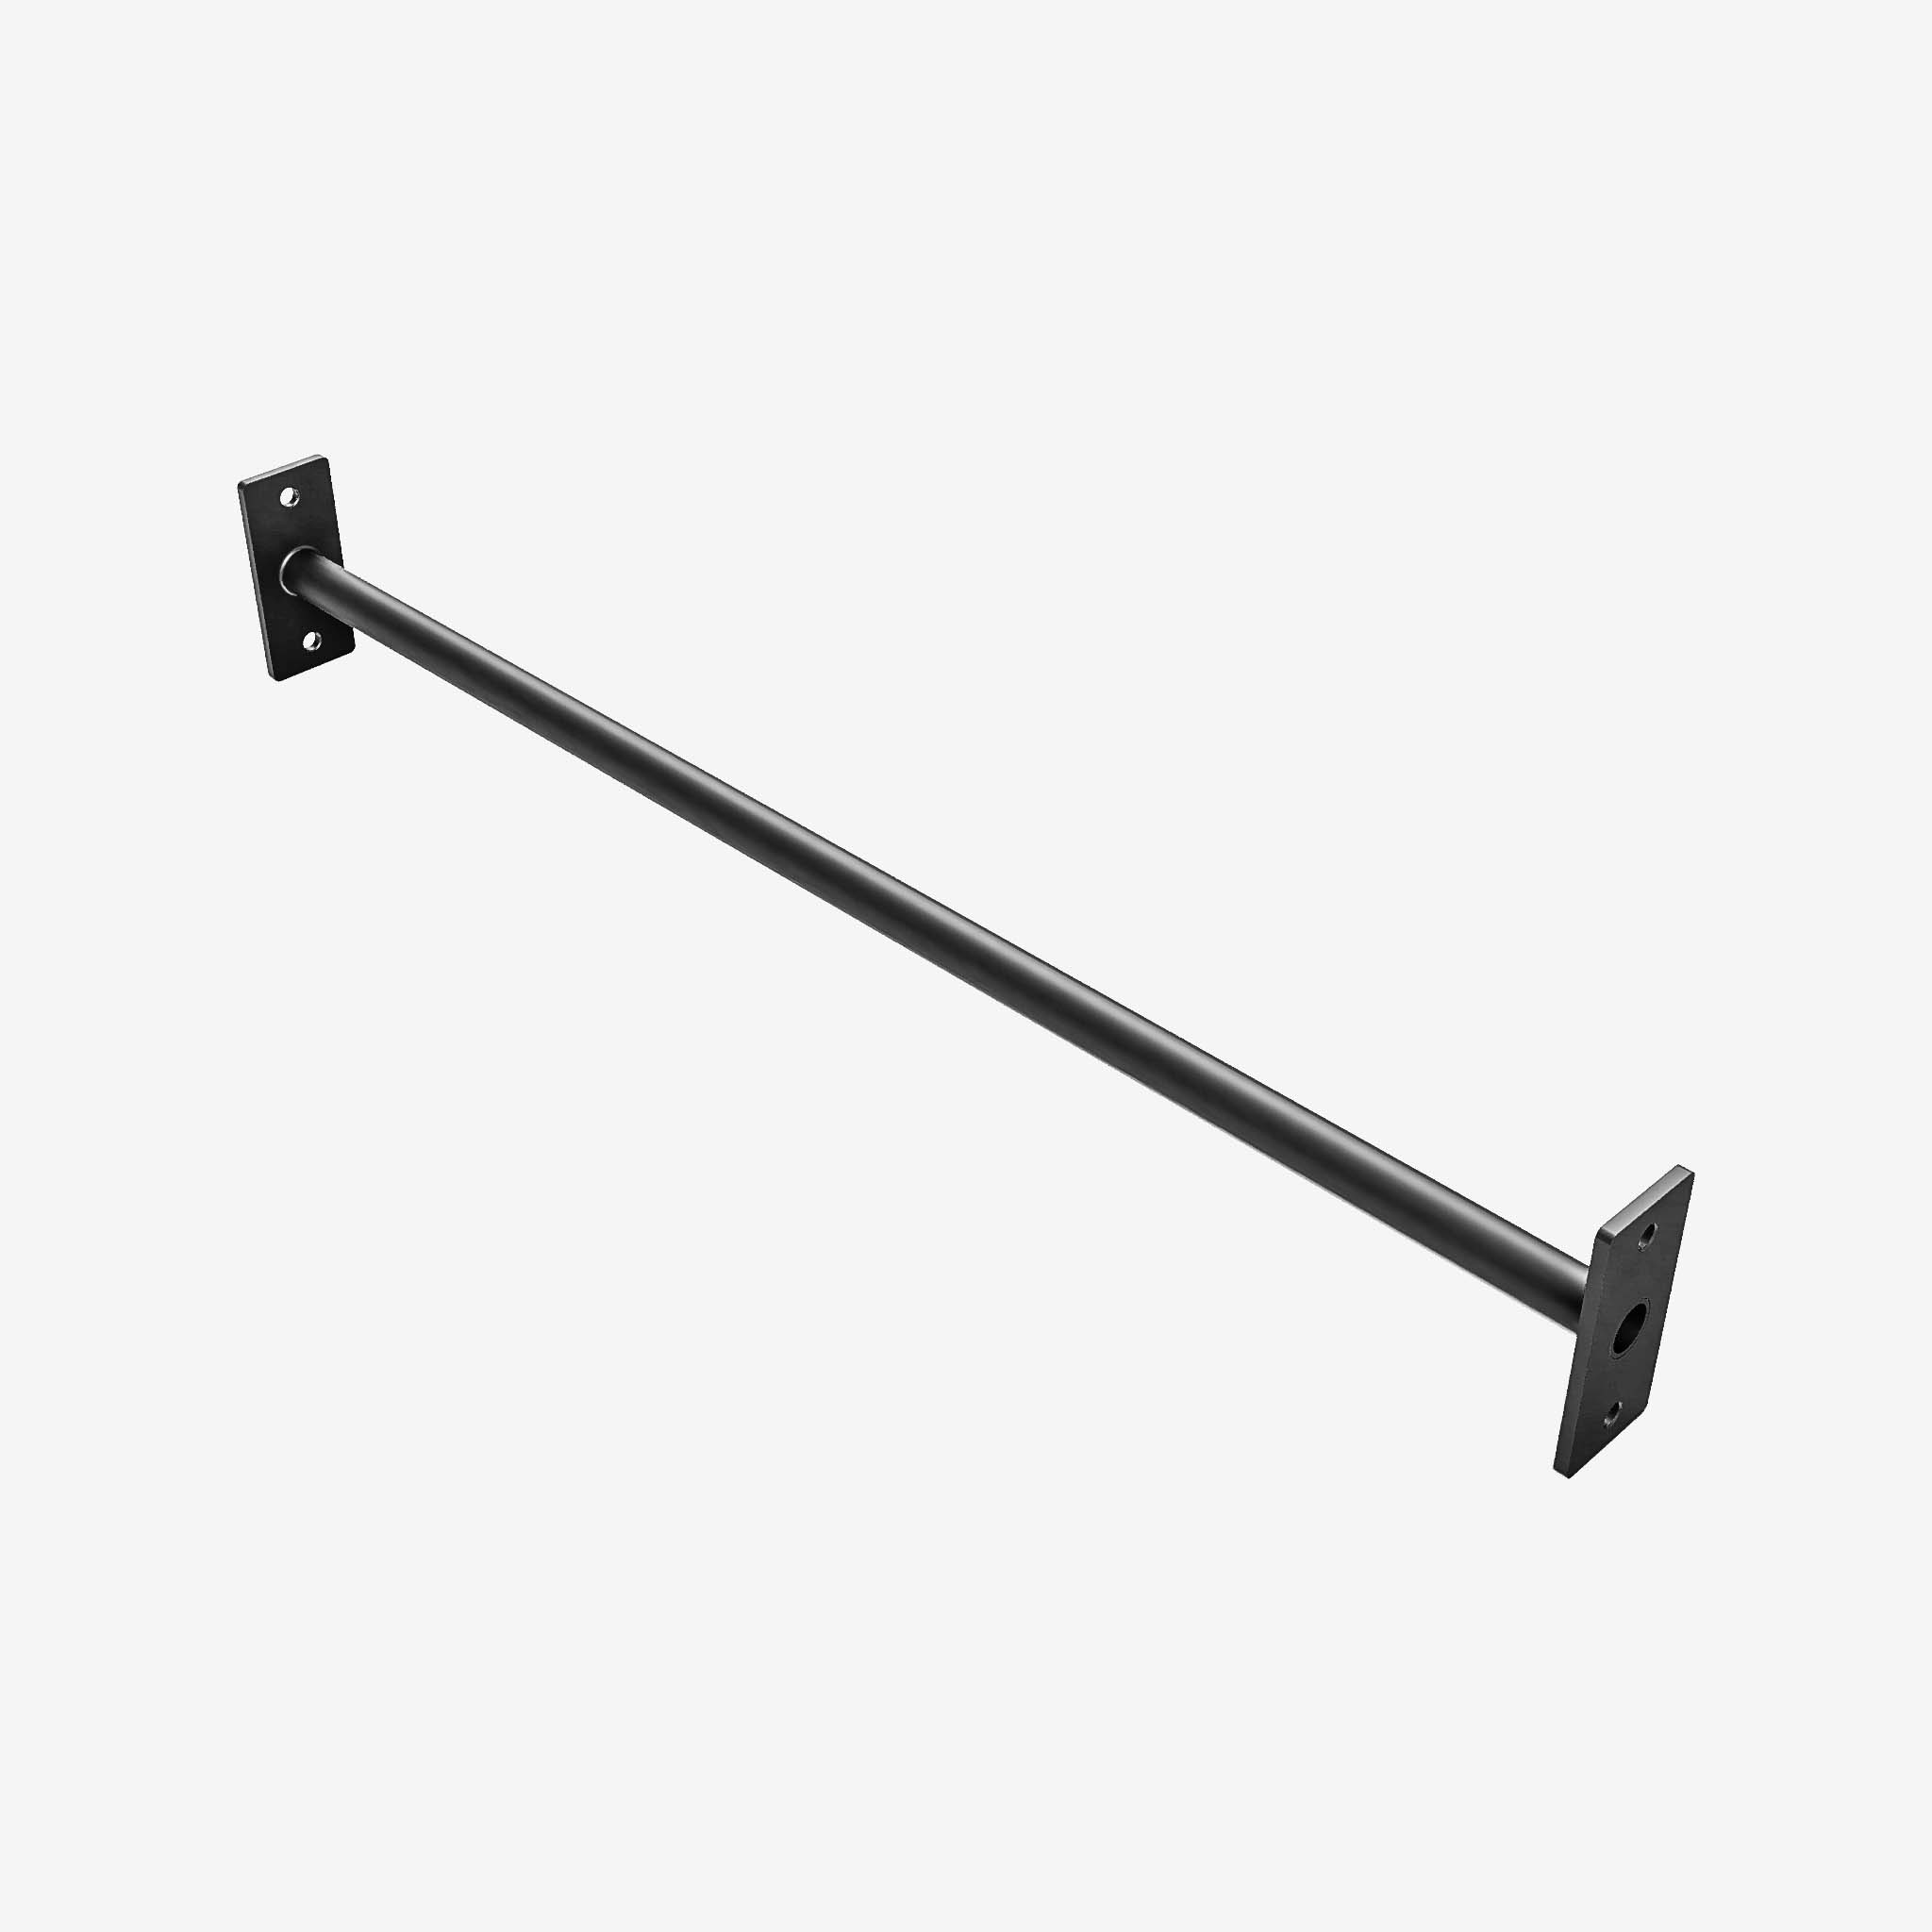 Featured image for “Single Chin Bar 1080mm”